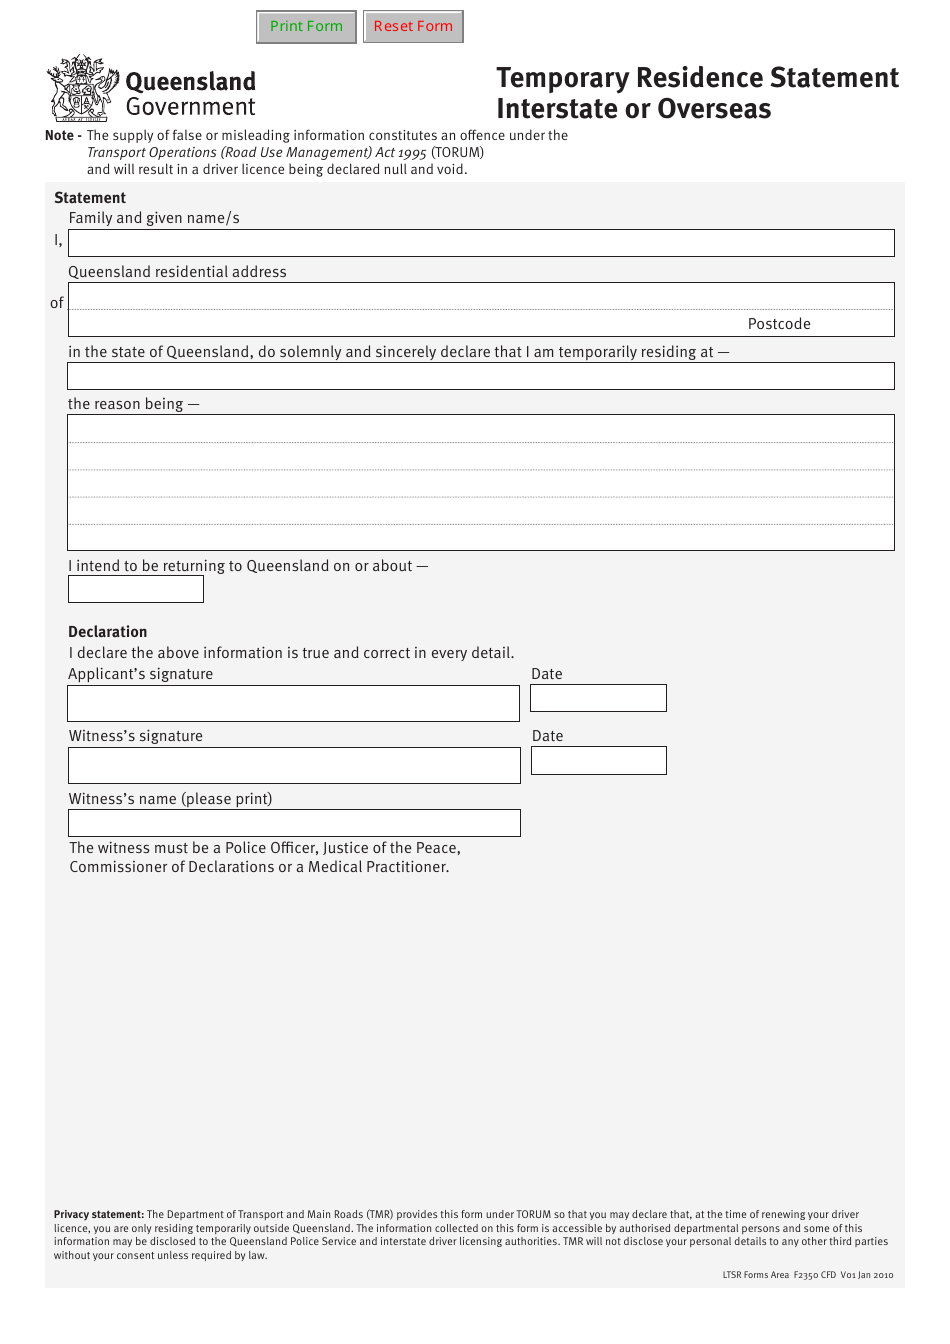 Form F2350 Temporary Residence Statement Interstate or Overseas - Queensland, Australia, Page 1